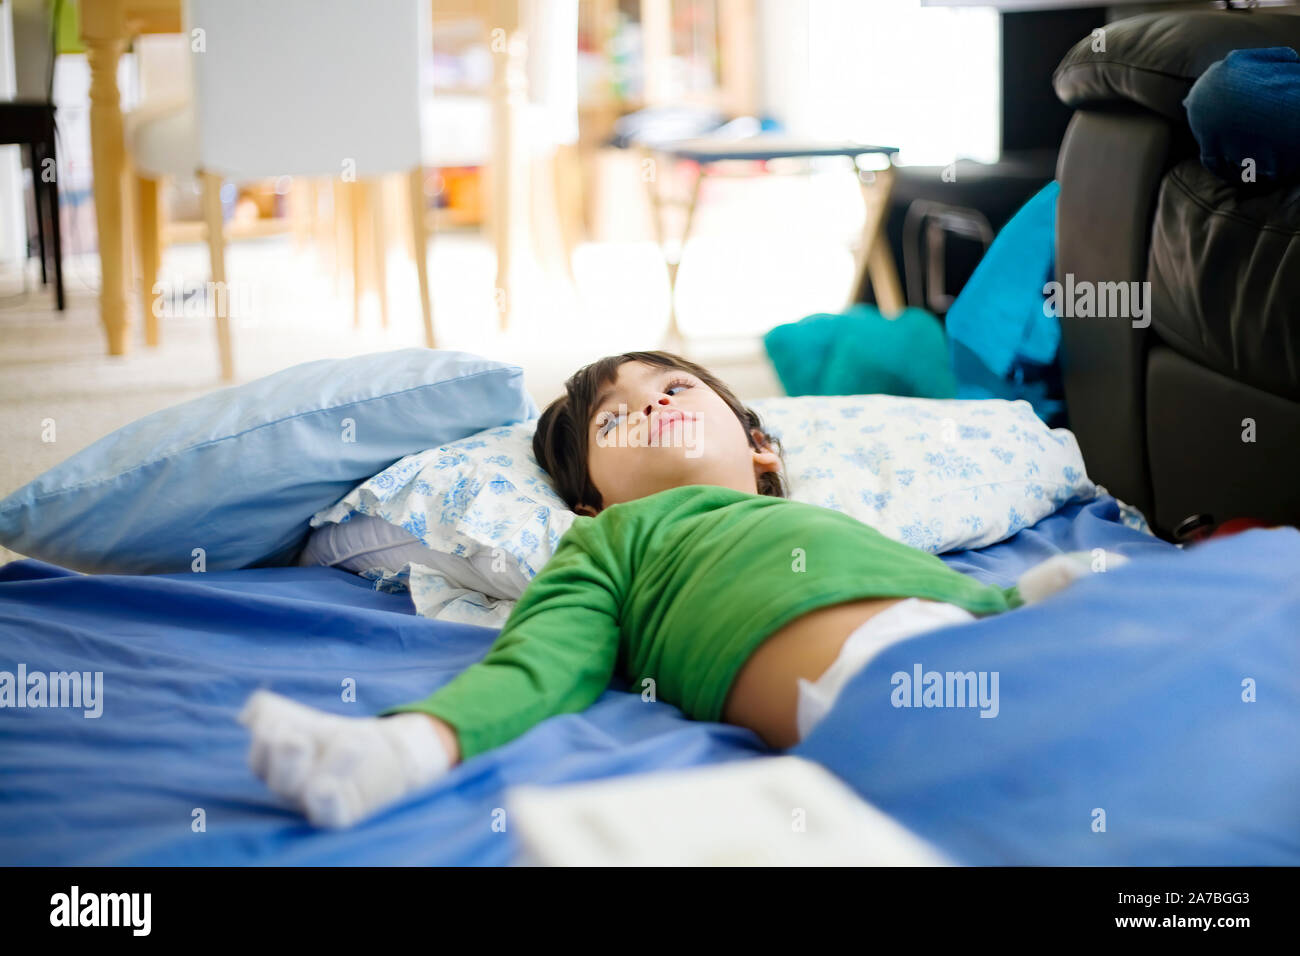 Young disabled boy with cerebral palsy lying on floor mat at home relaxing, wearing diapers Stock Photo